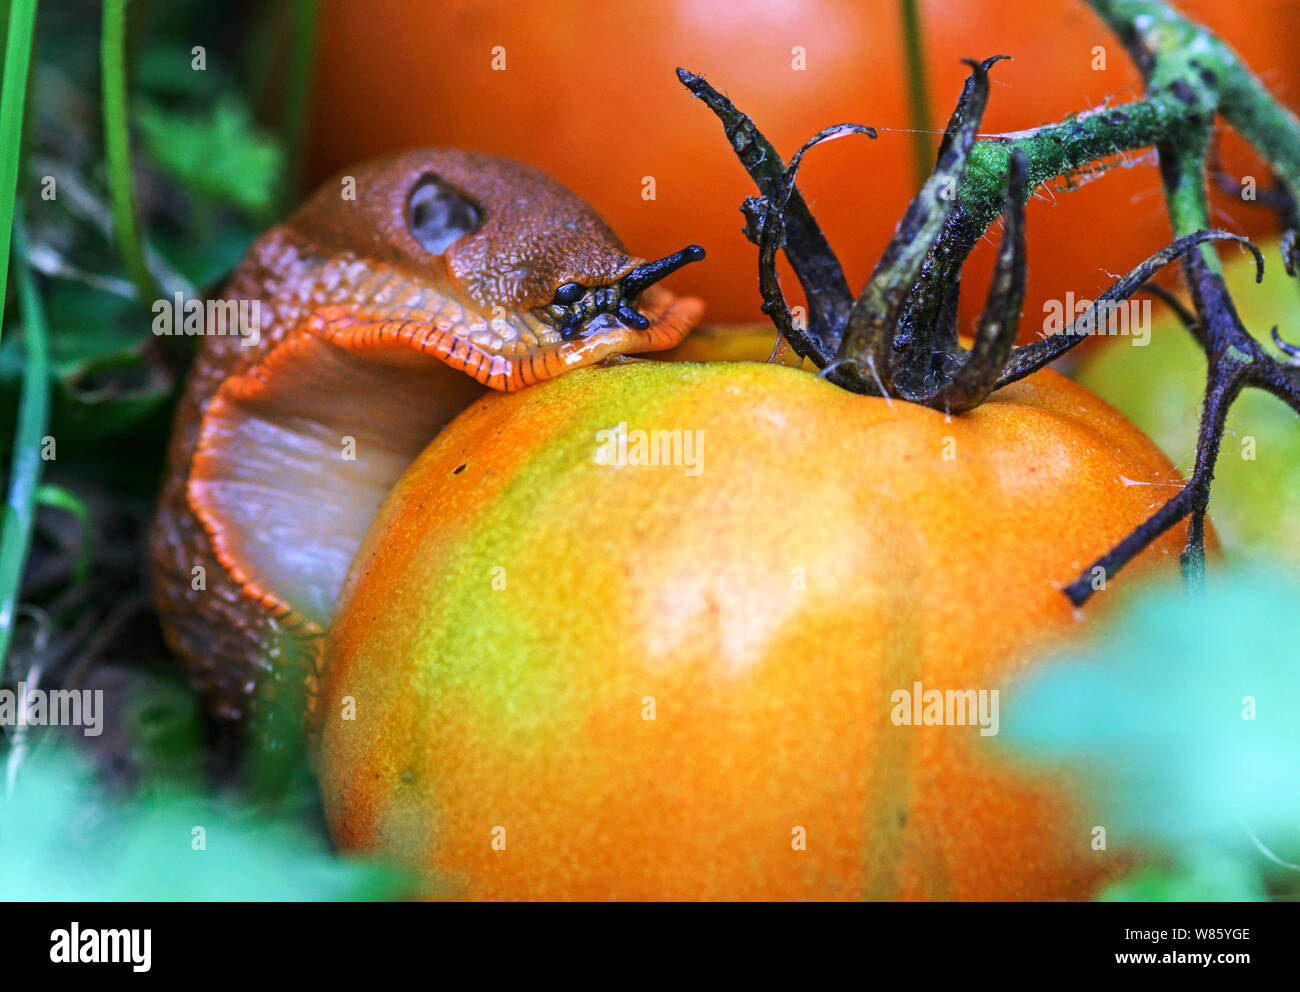 The Red Slug Arion rufus {ater}.A large robust slug common in my part of southwest France. Stock Photo